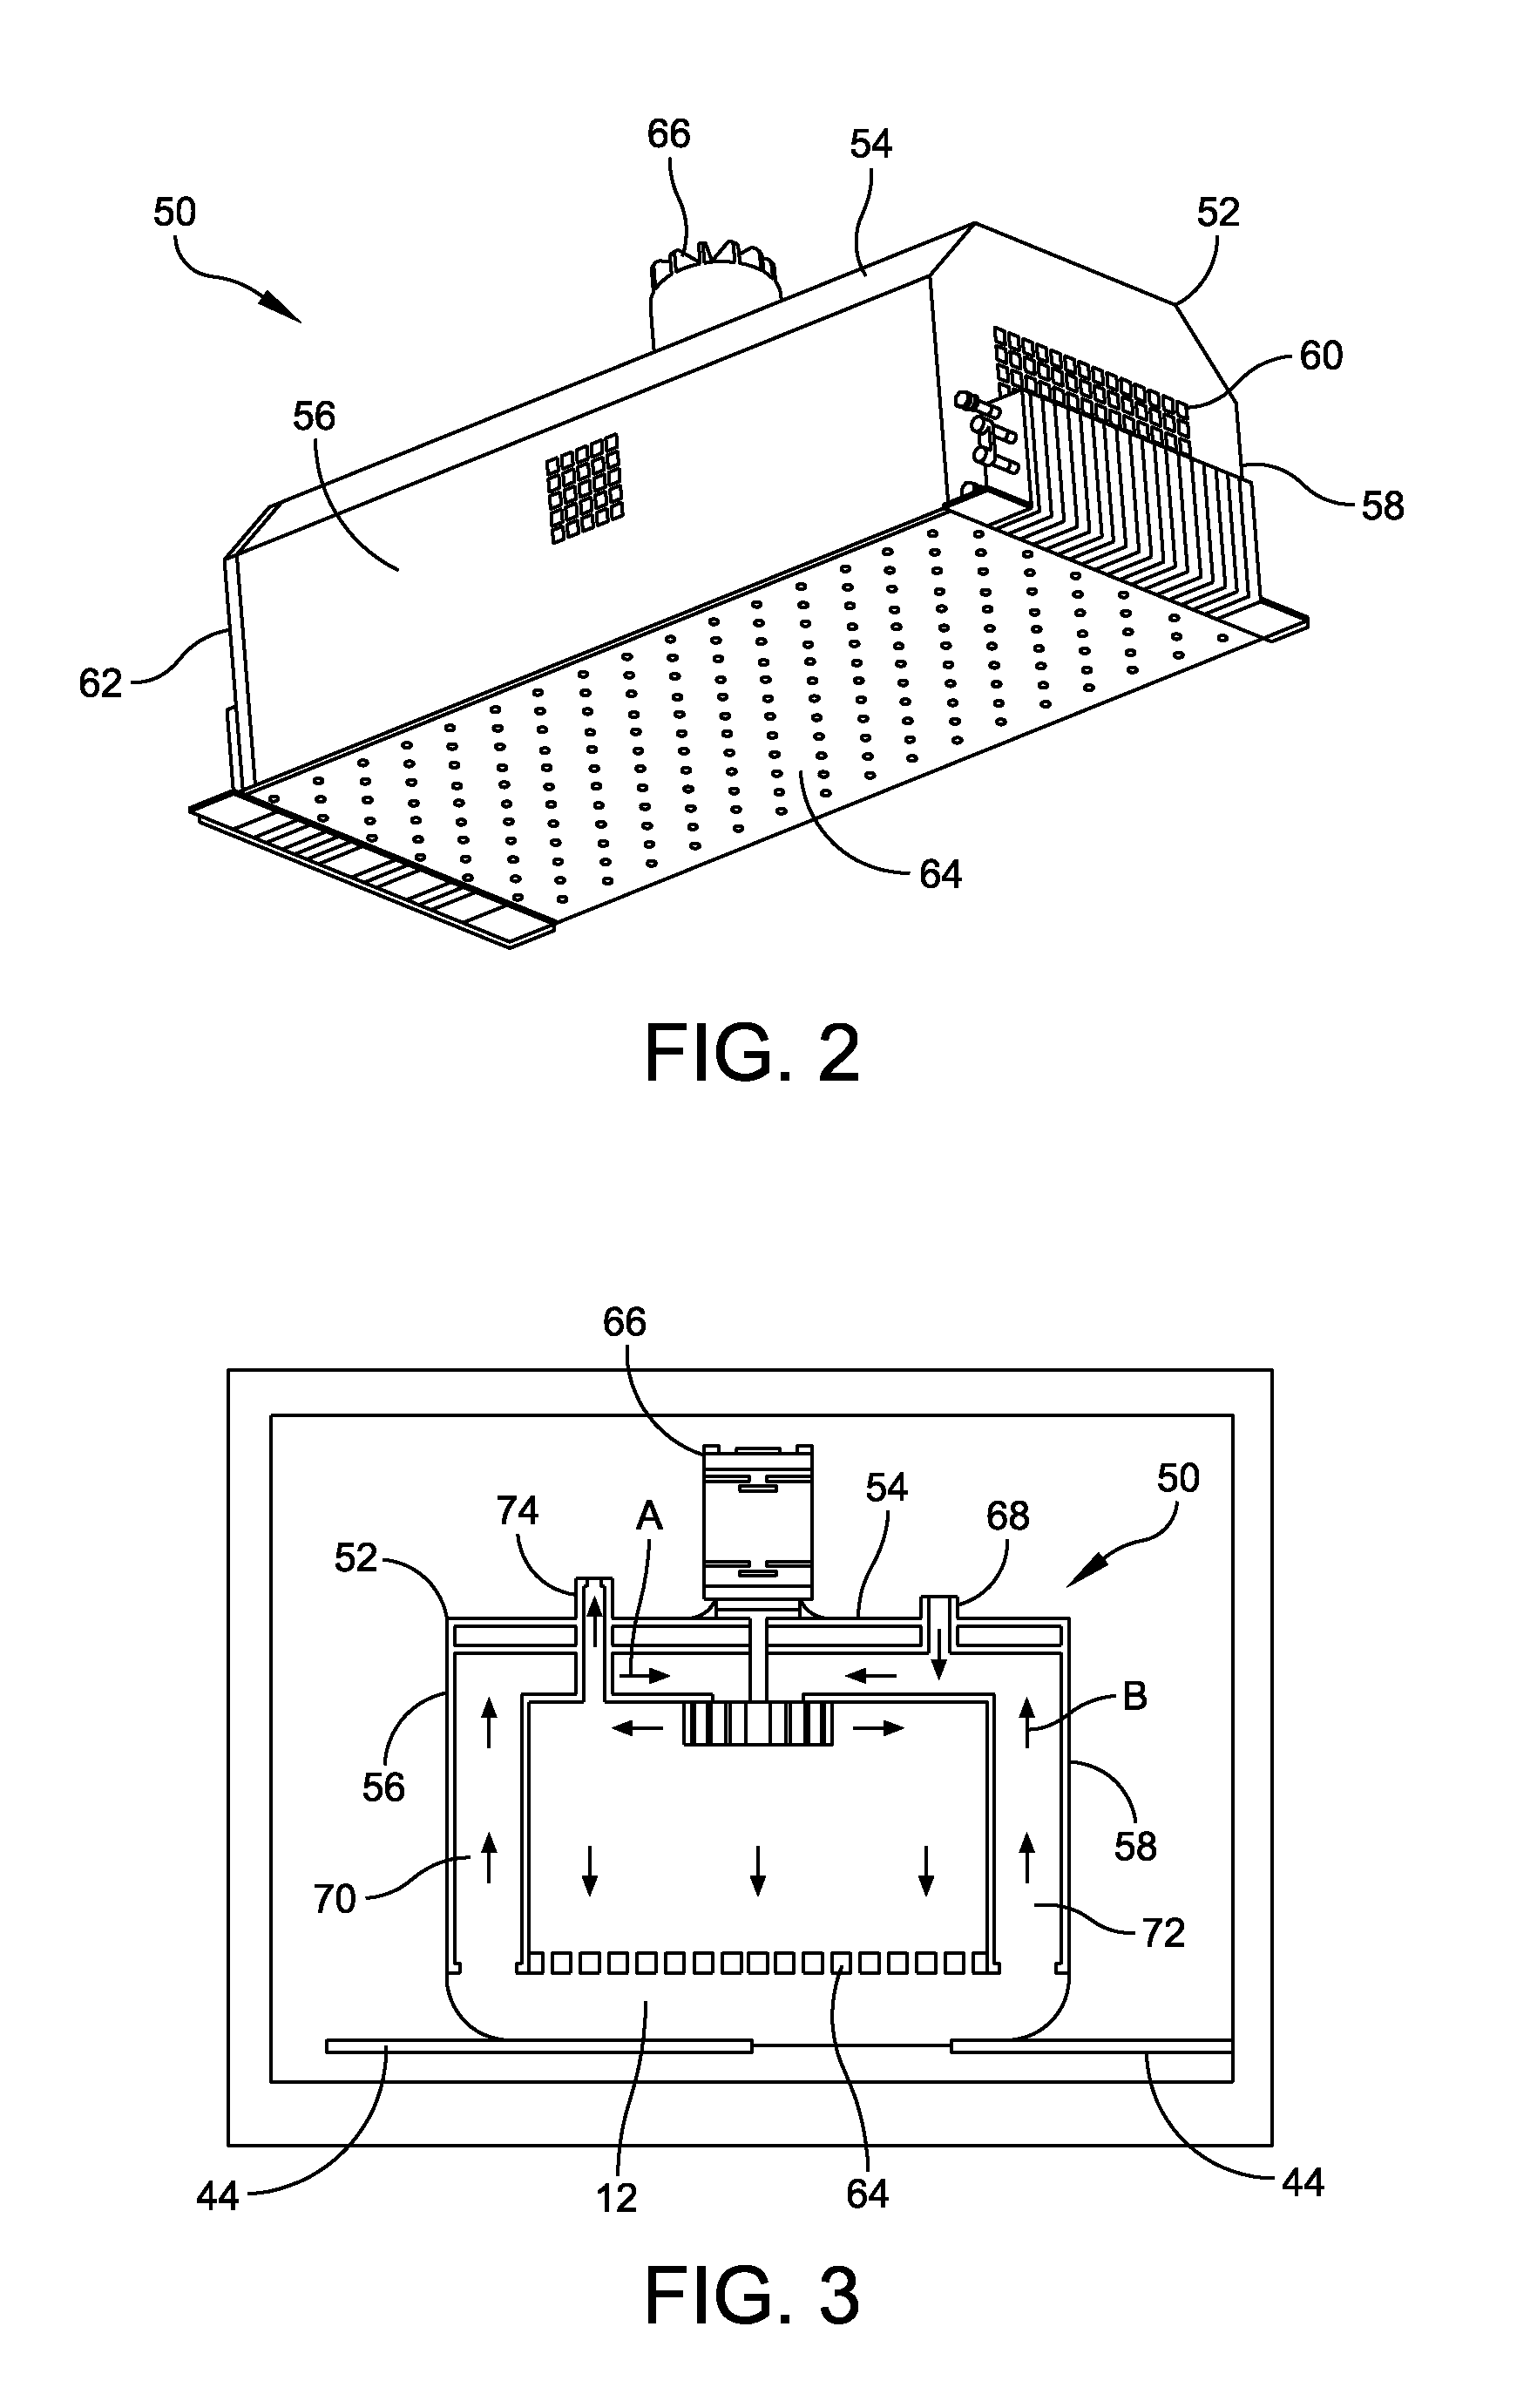 Reflow oven and methods of treating surfaces of the relfow oven